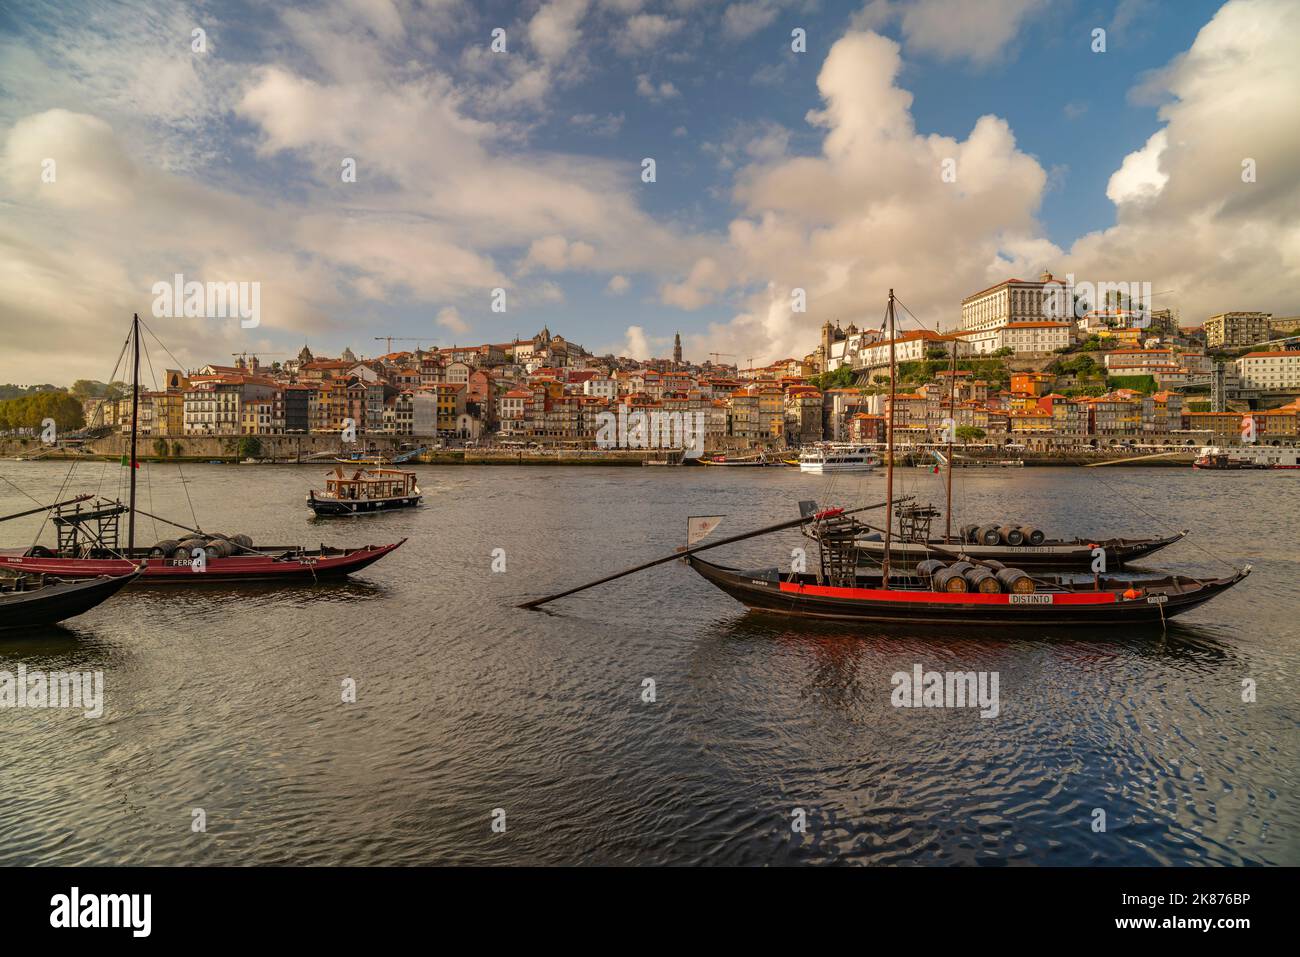 View of the Douro River and Rabelo boats aligned with colourful buildings, Porto, Norte, Portugal, Europe Stock Photo